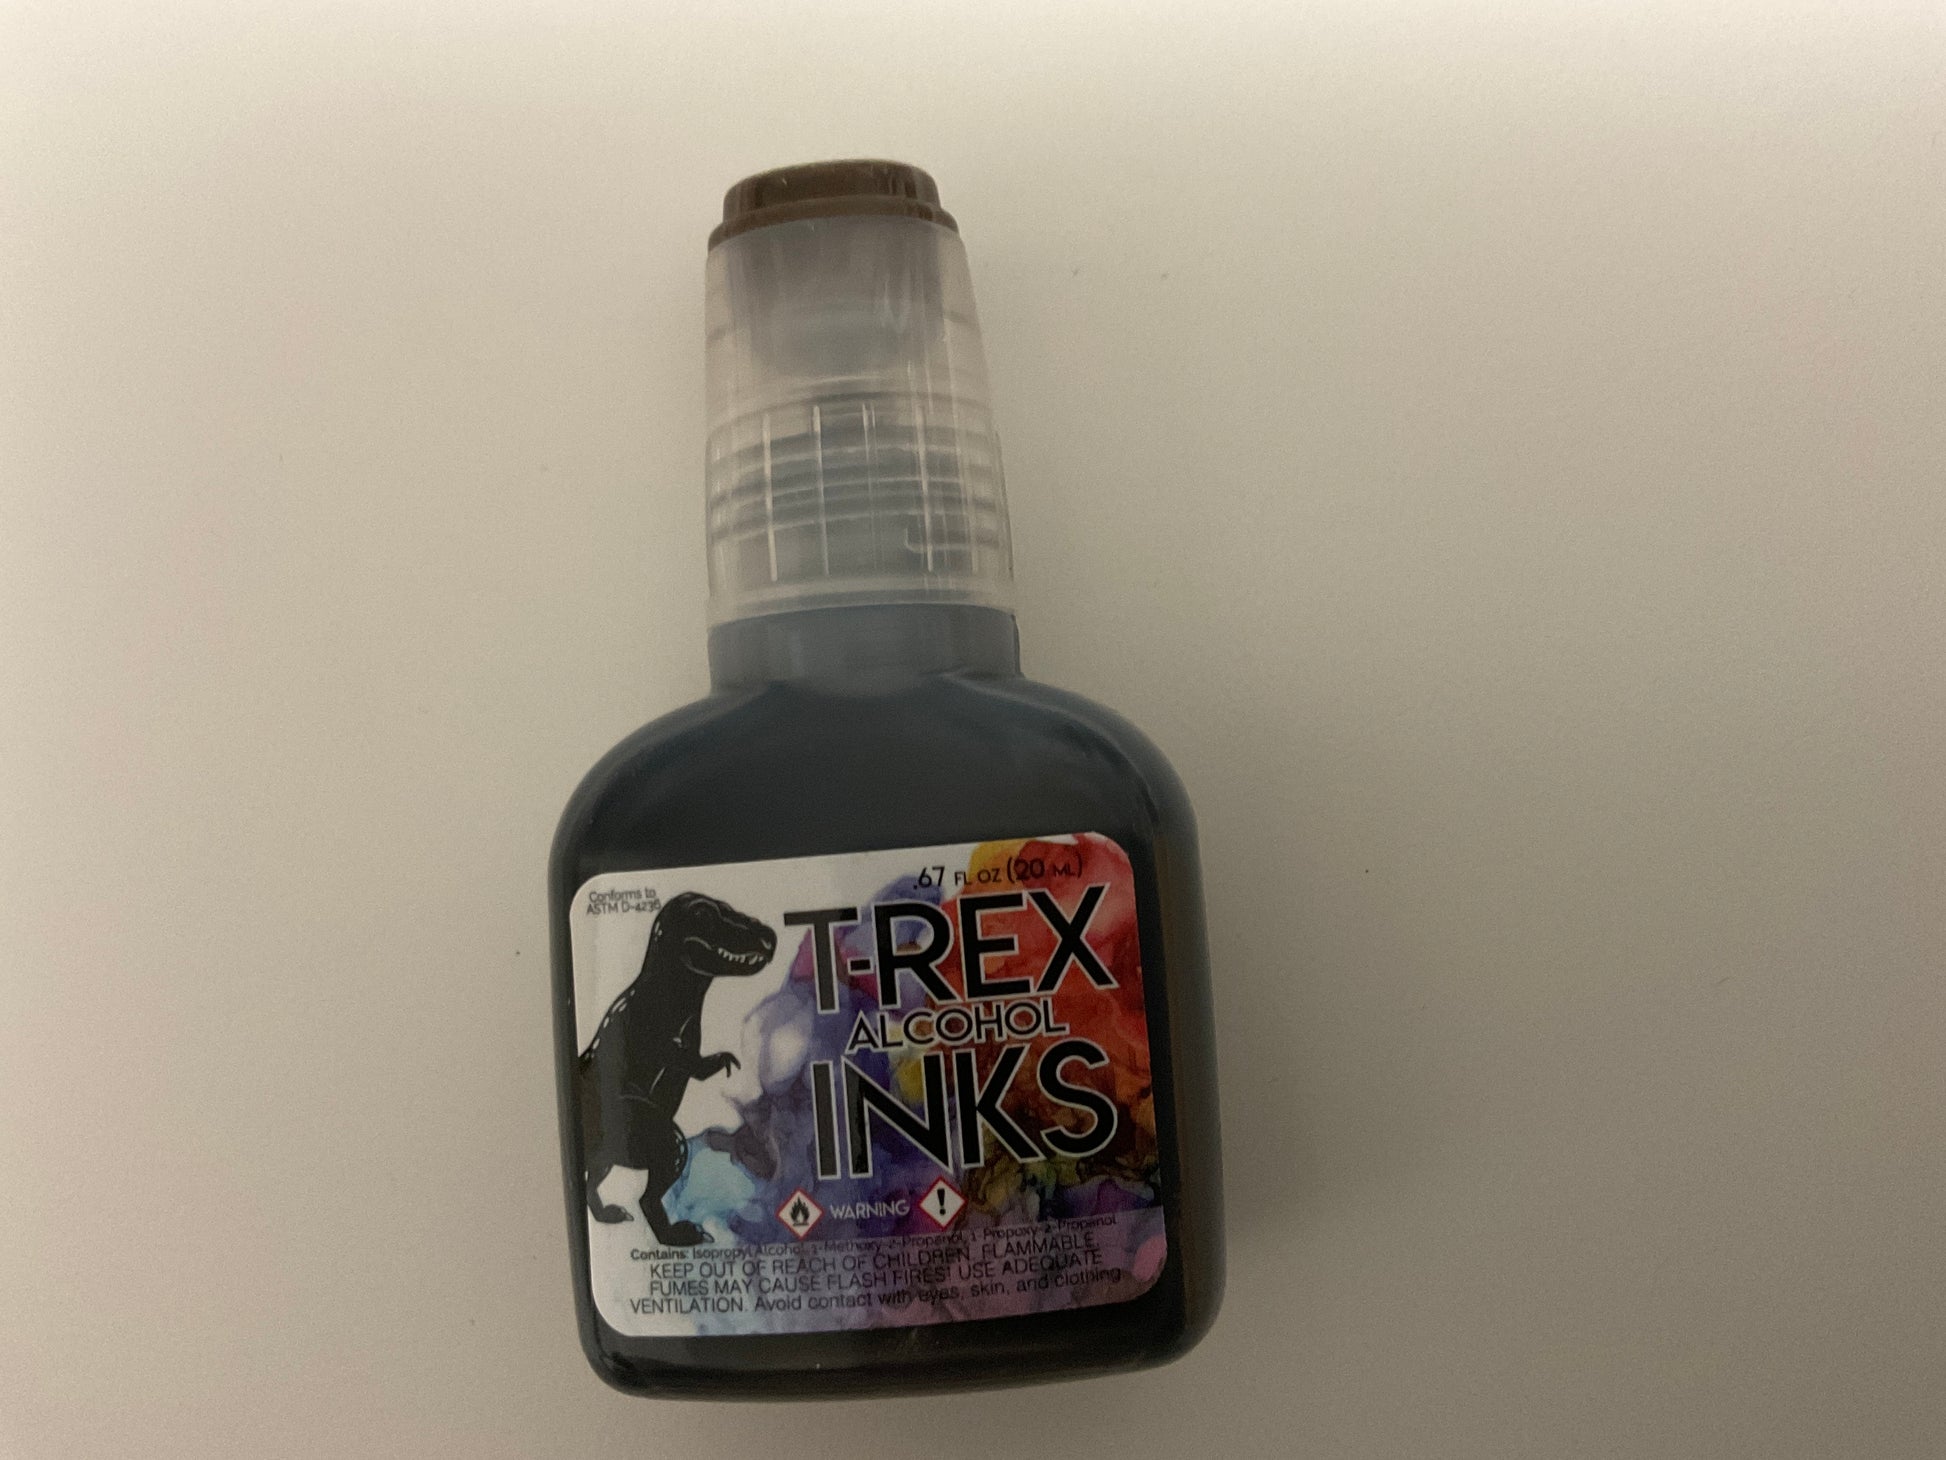 T-Rex Alcohol Inks – Me Time Specialty Craft Supplies